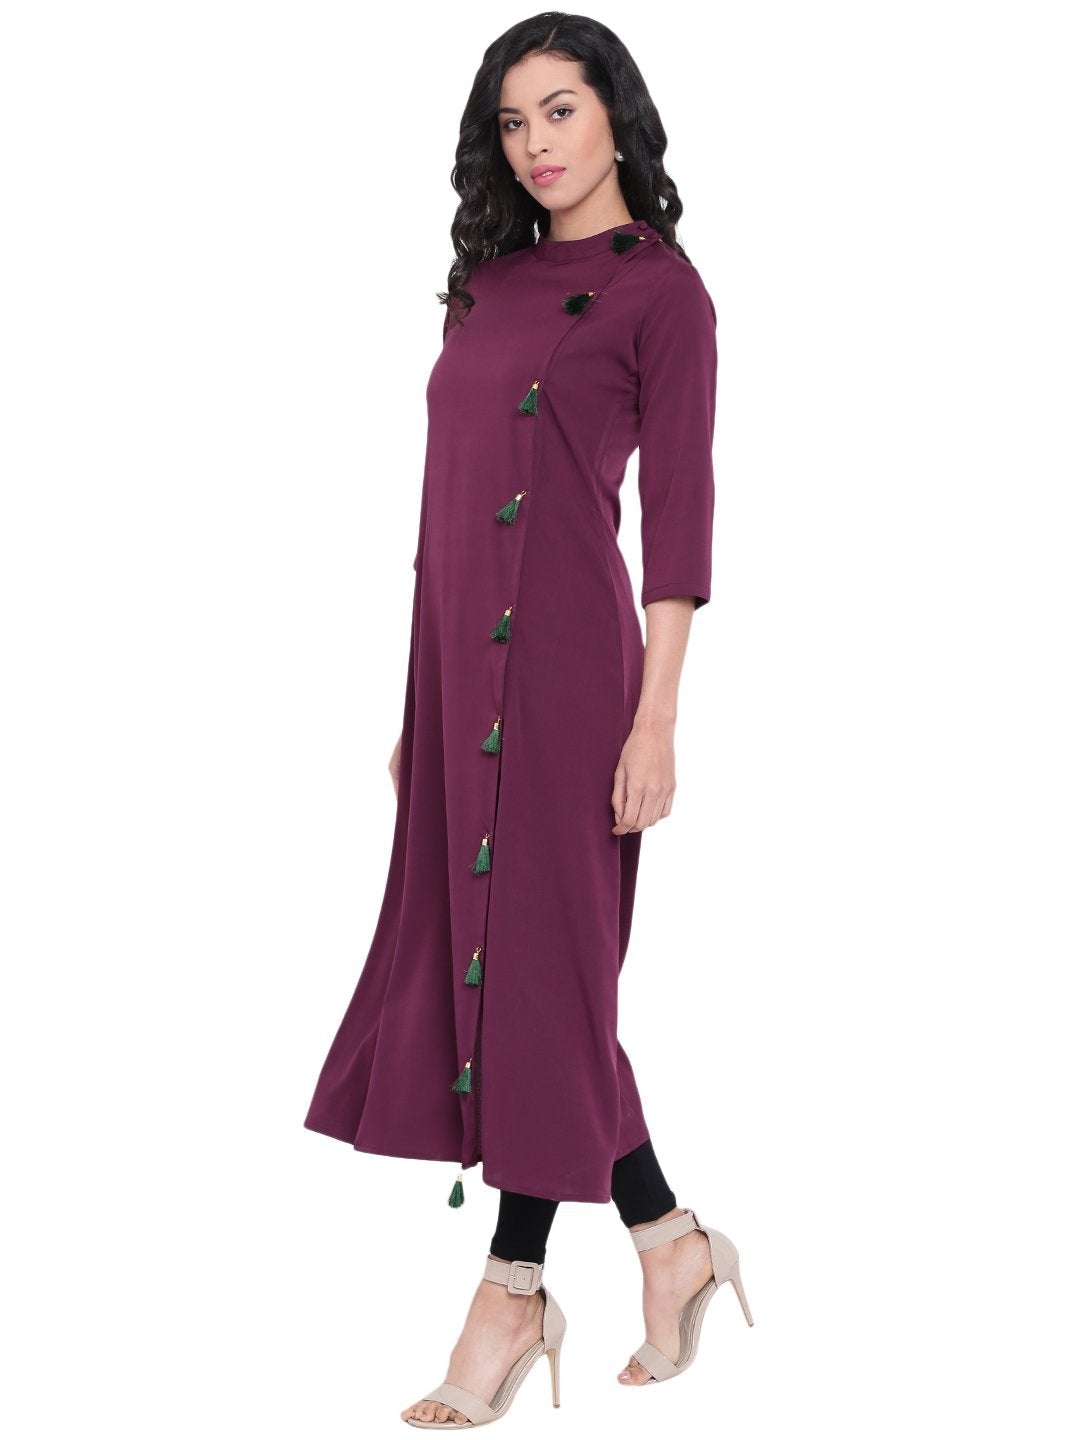 Kurta With Green Tassles On The Side